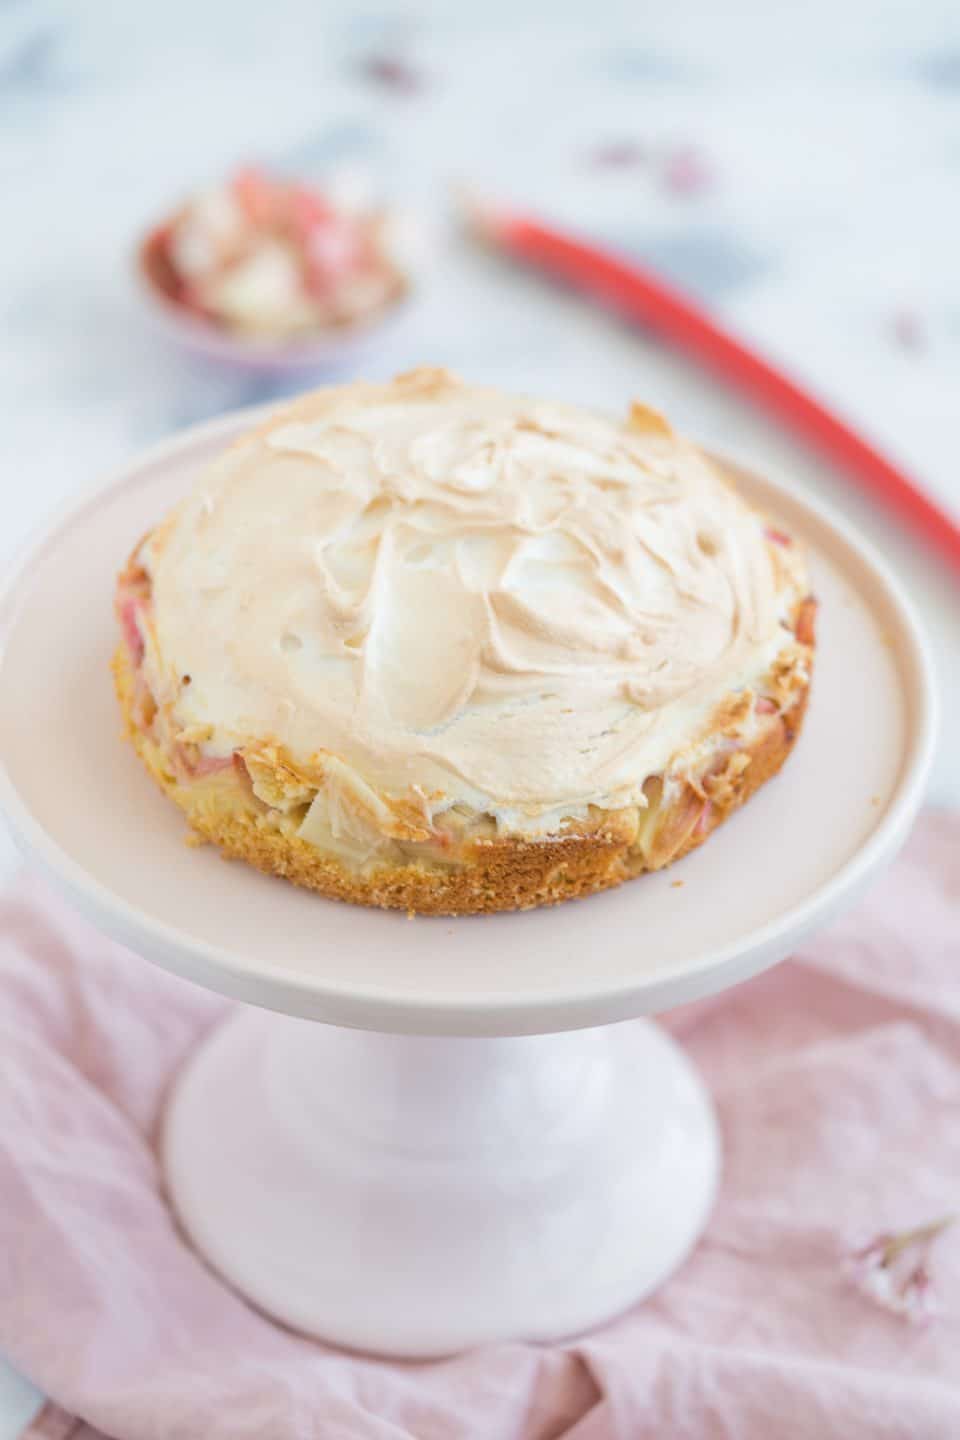 Rhubarb Cake With Meringue Topping Baking For Happiness